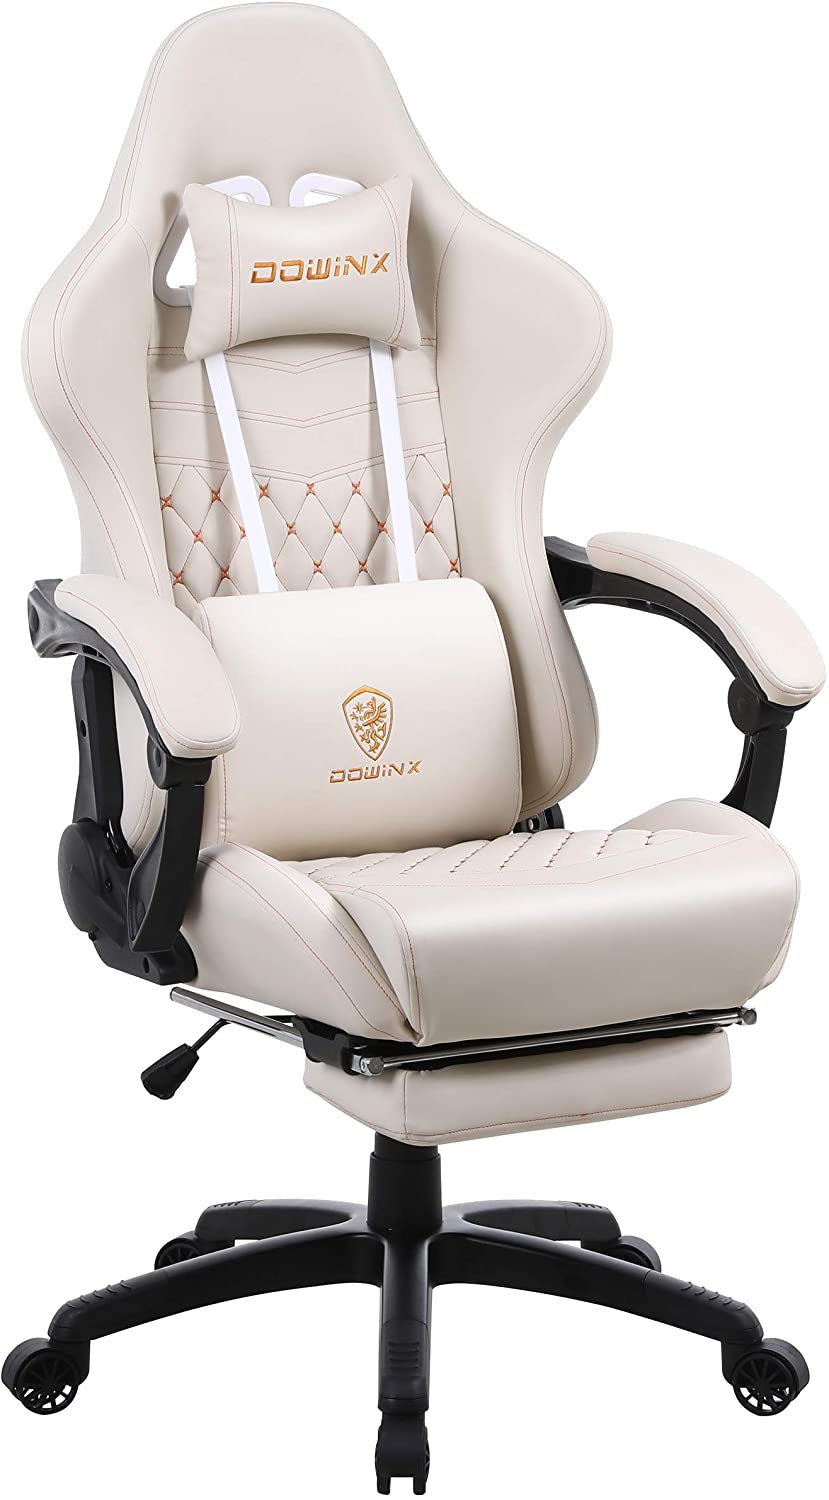 Dowinx Gaming Chair Ivory